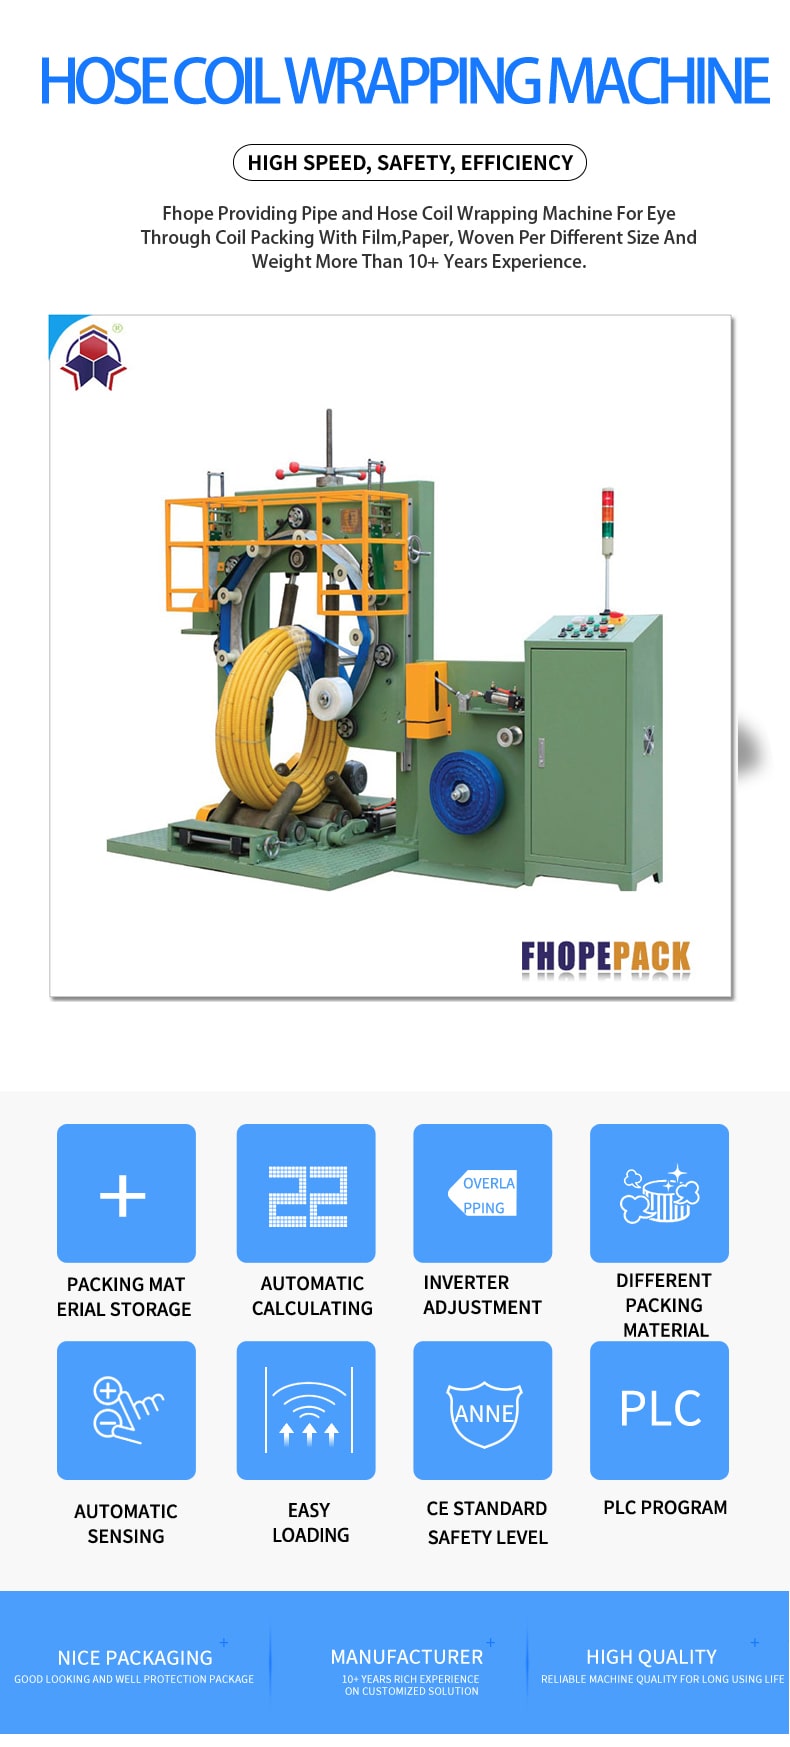 Hose Coil wrapping machinery FPH-400W